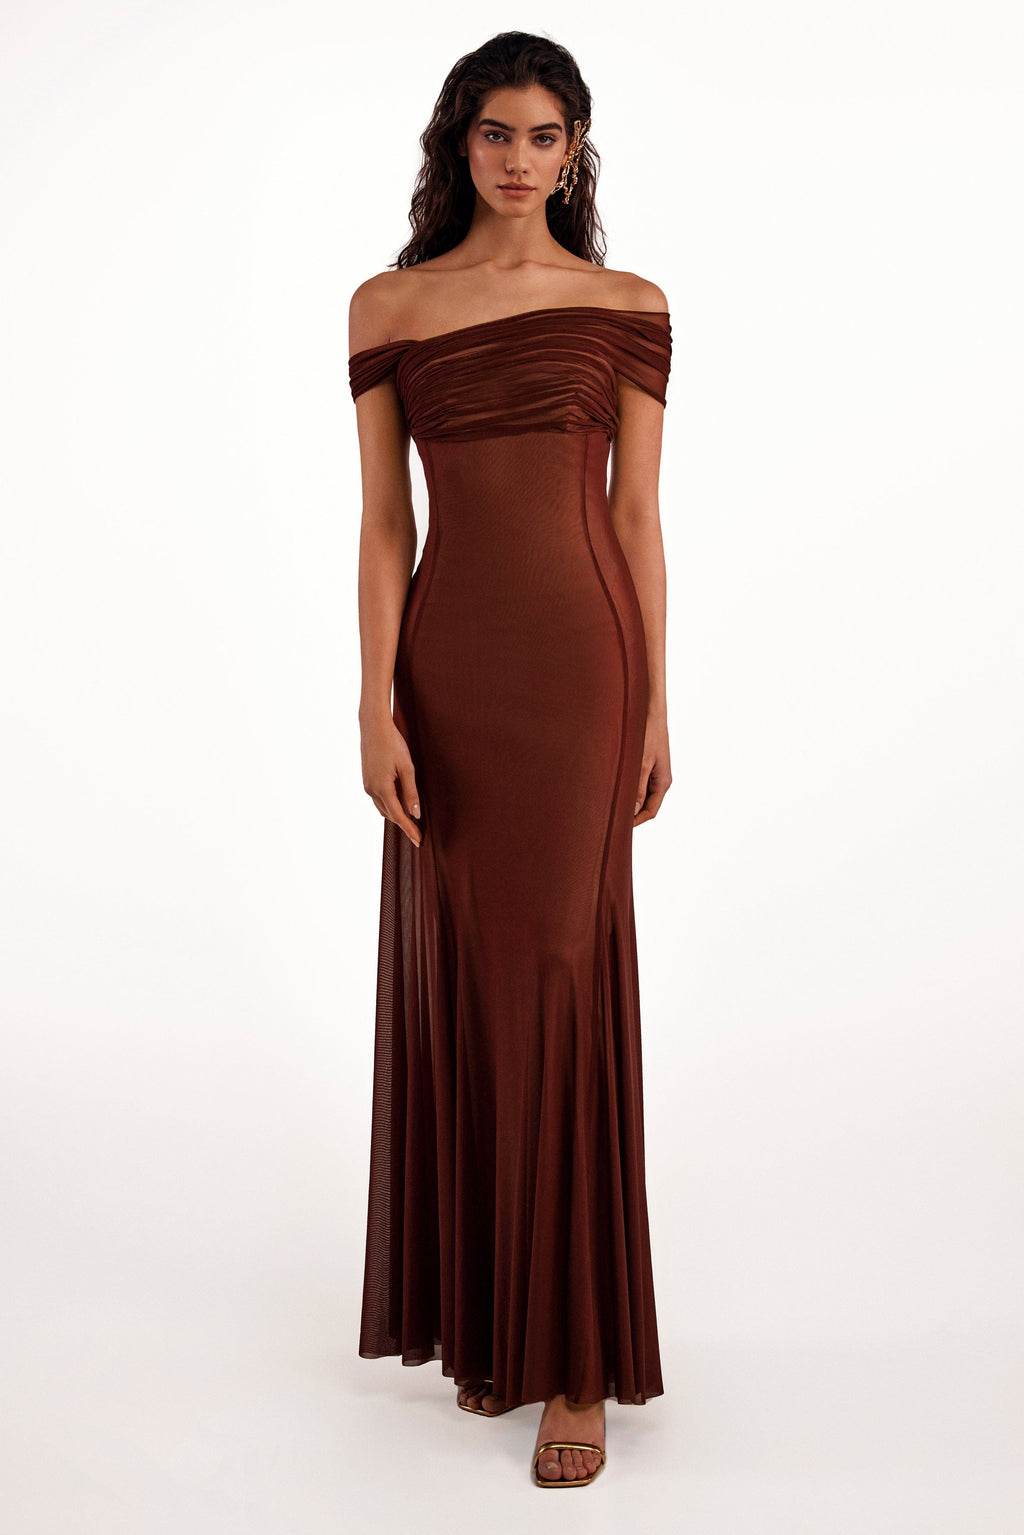 Second-skin maxi dress in chocolate color